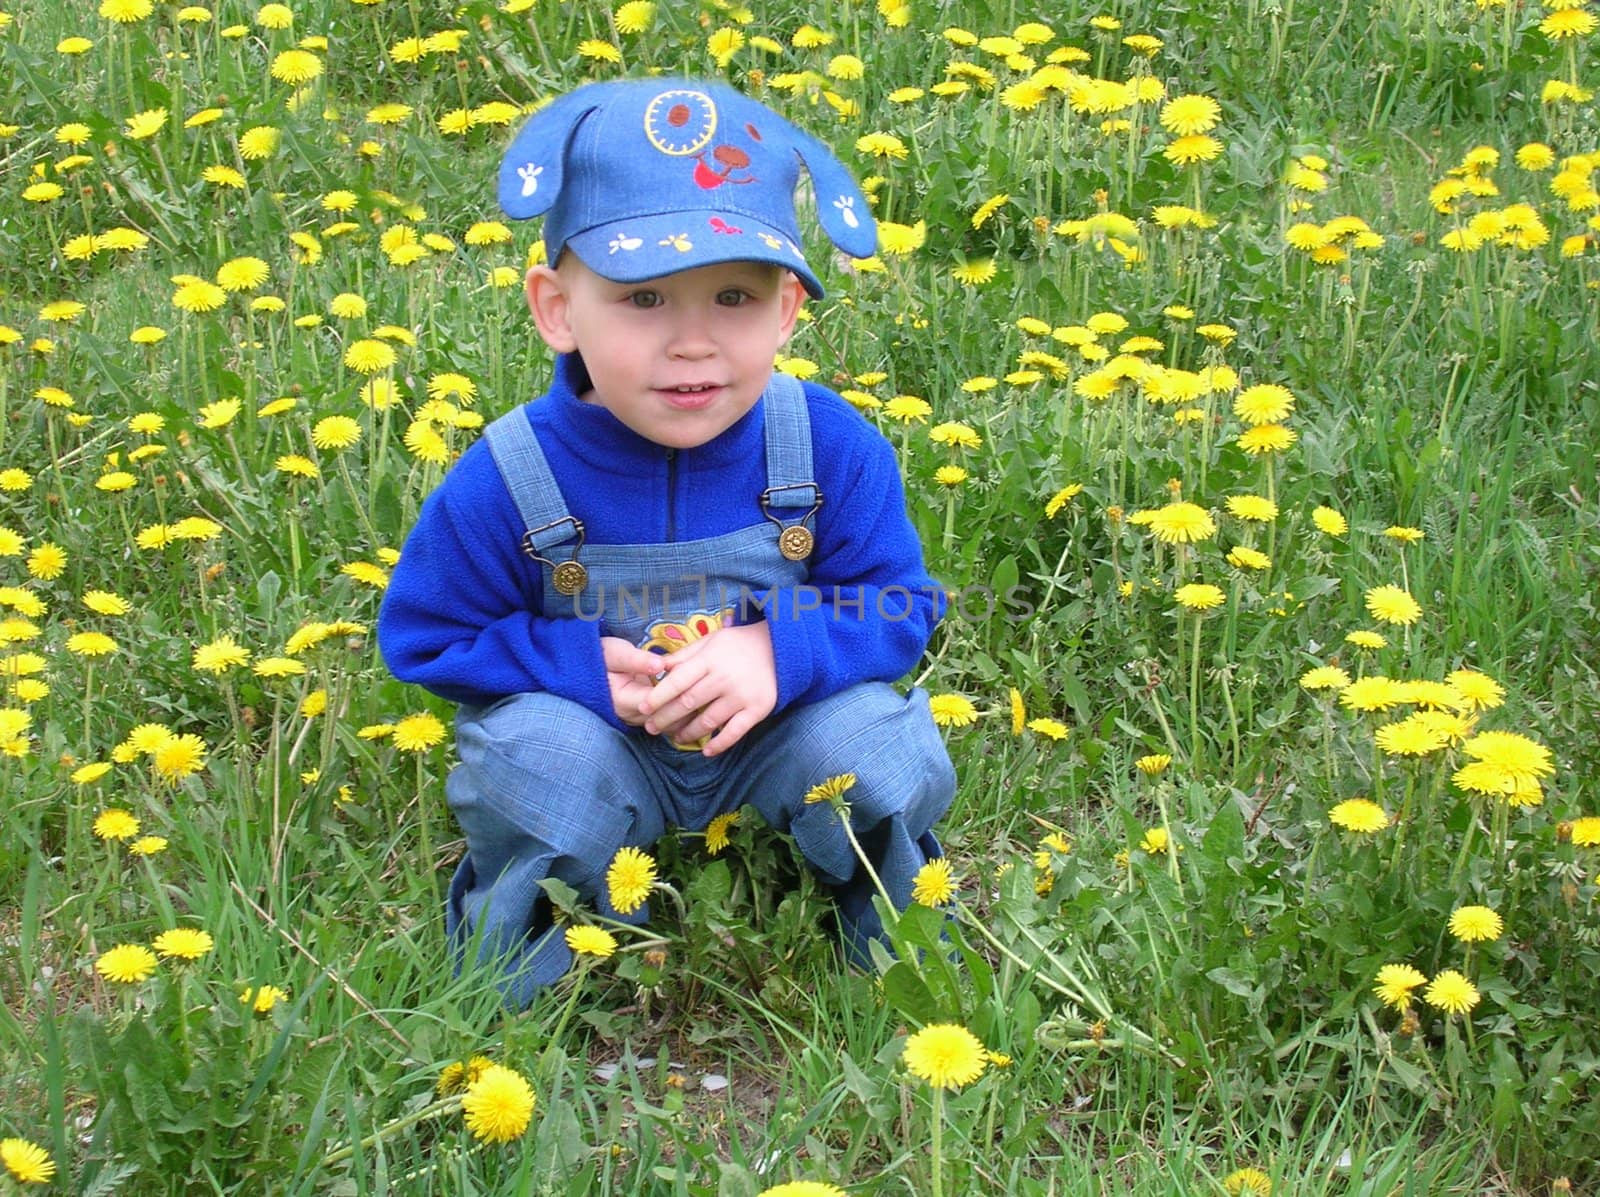 the boy and the dandelions by veronka72